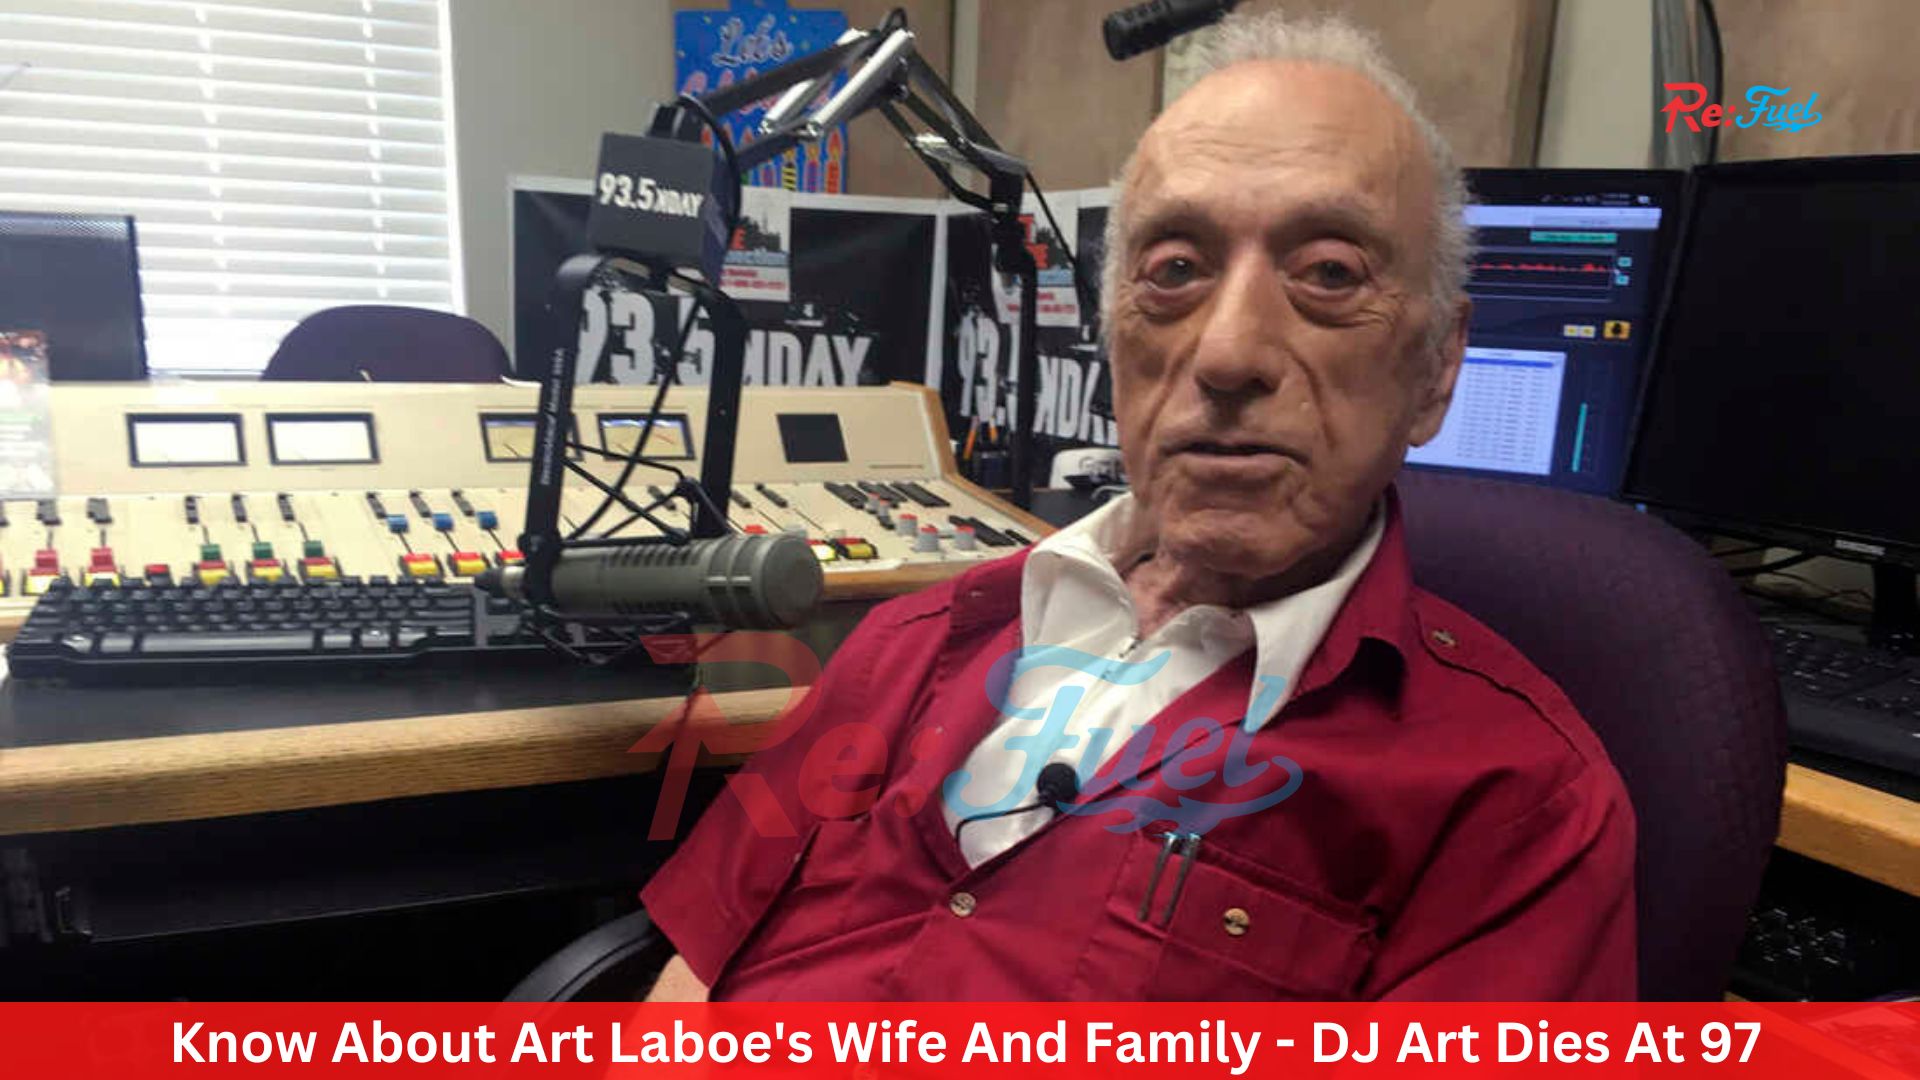 Know About Art Laboe's Wife And Family - DJ Art Dies At 97